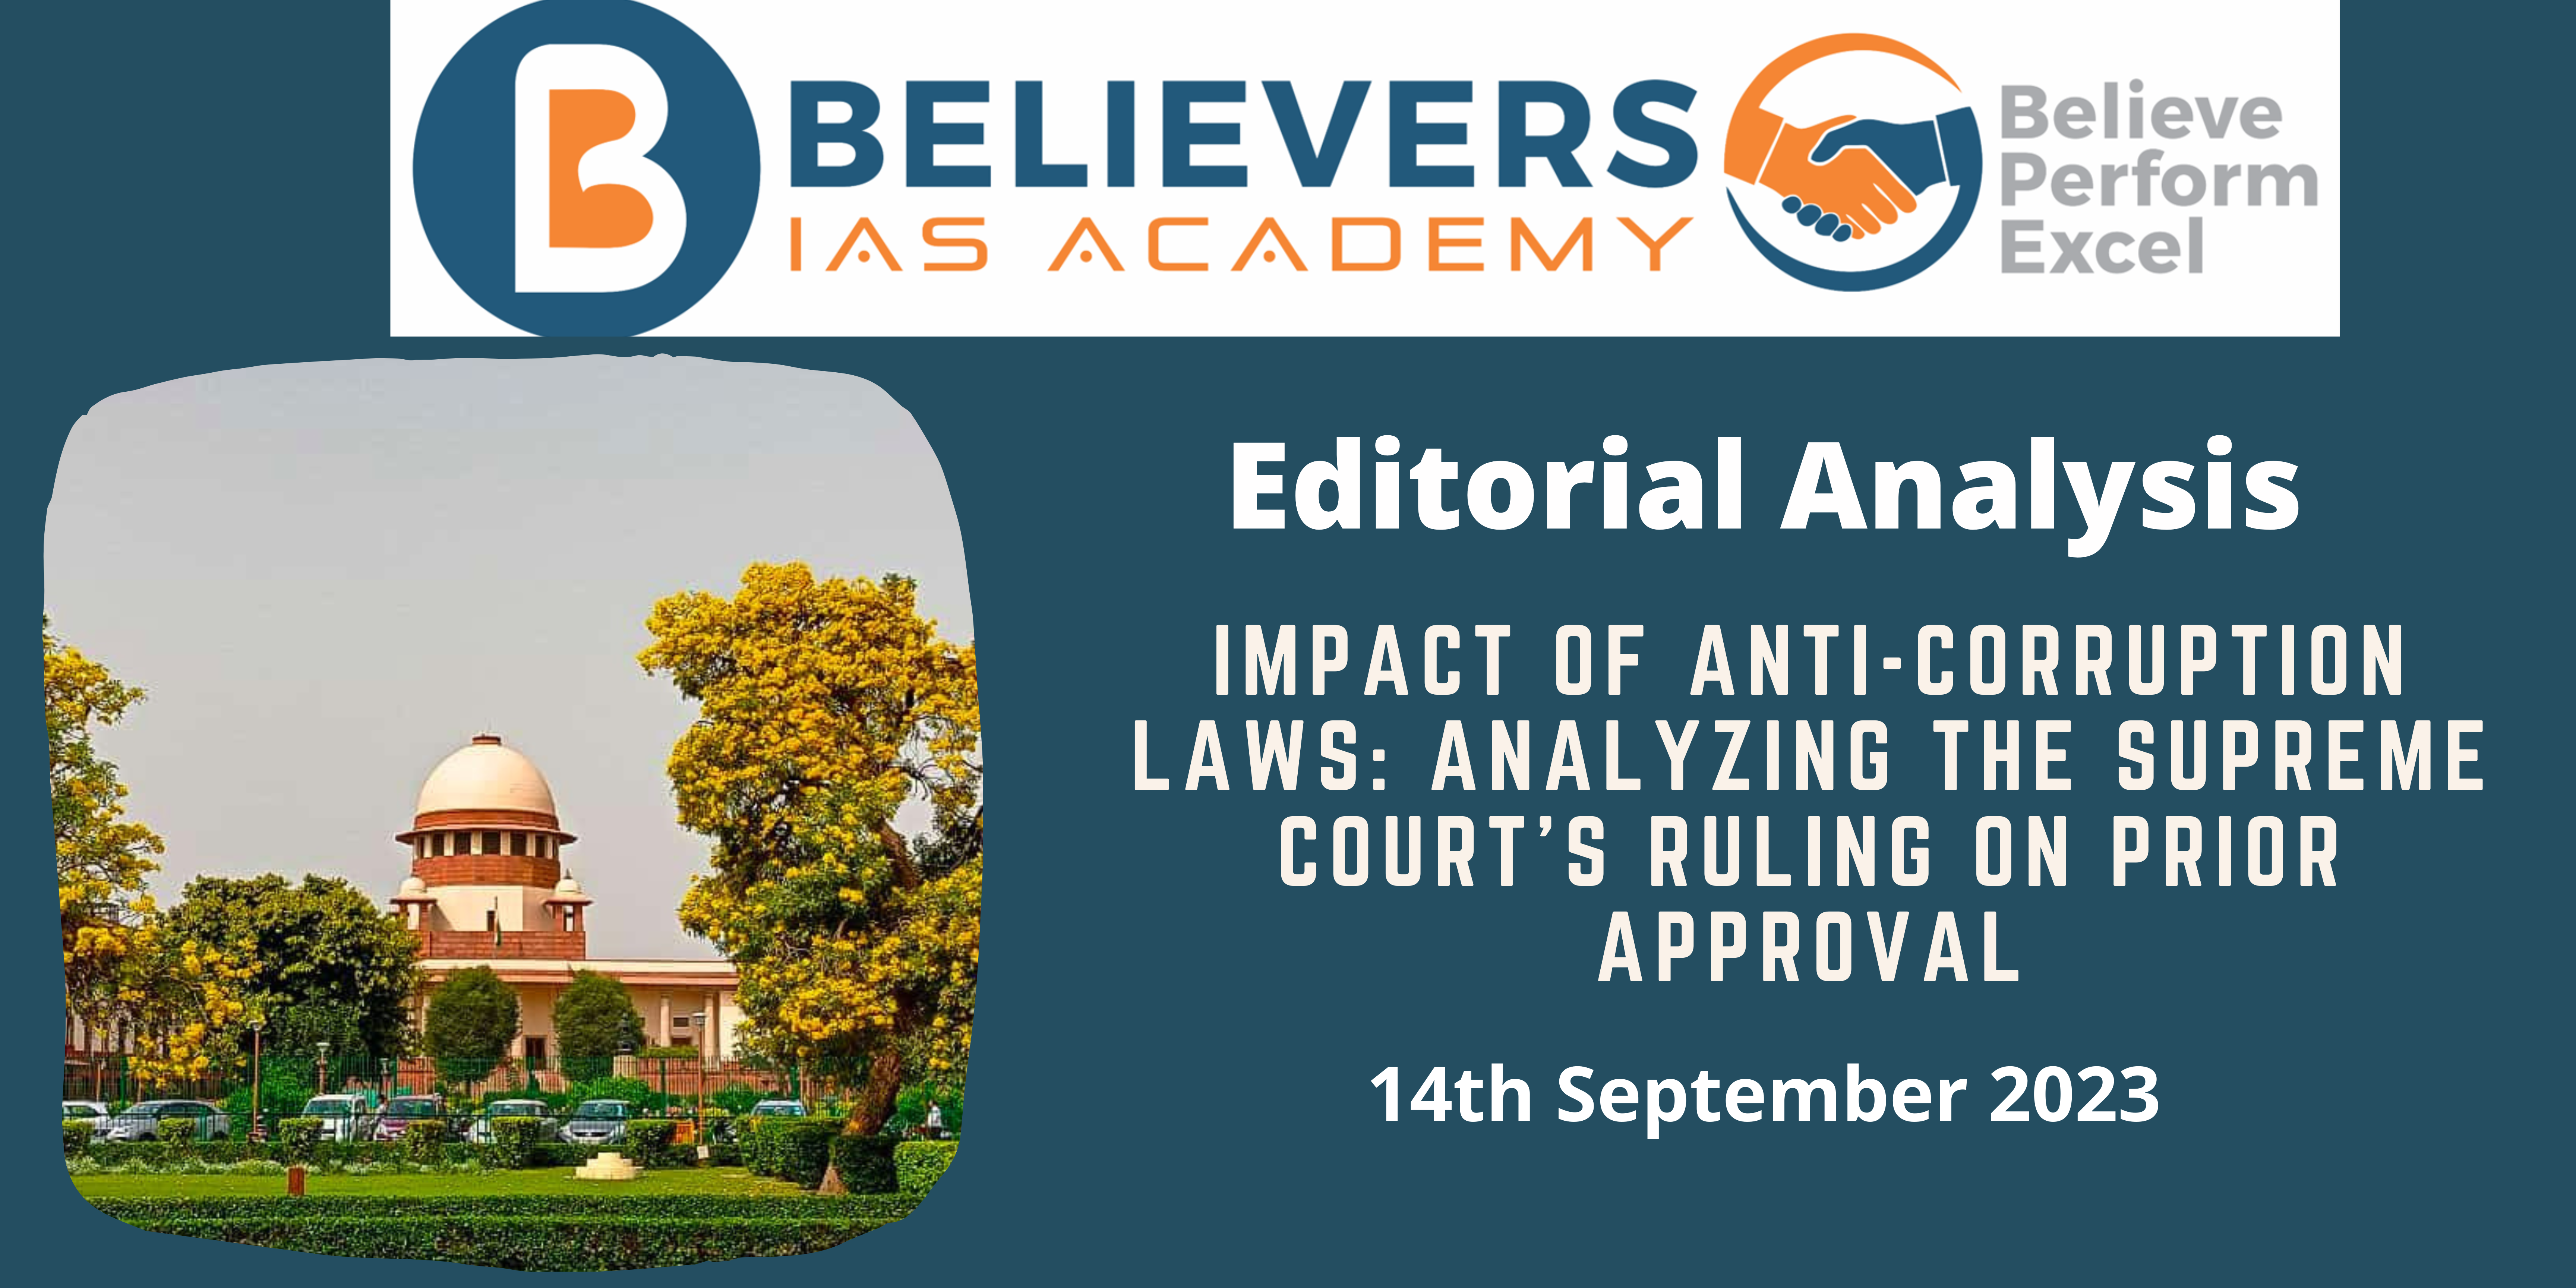 Impact of Anti-Corruption Laws: Analyzing the Supreme Court's Ruling on Prior Approval